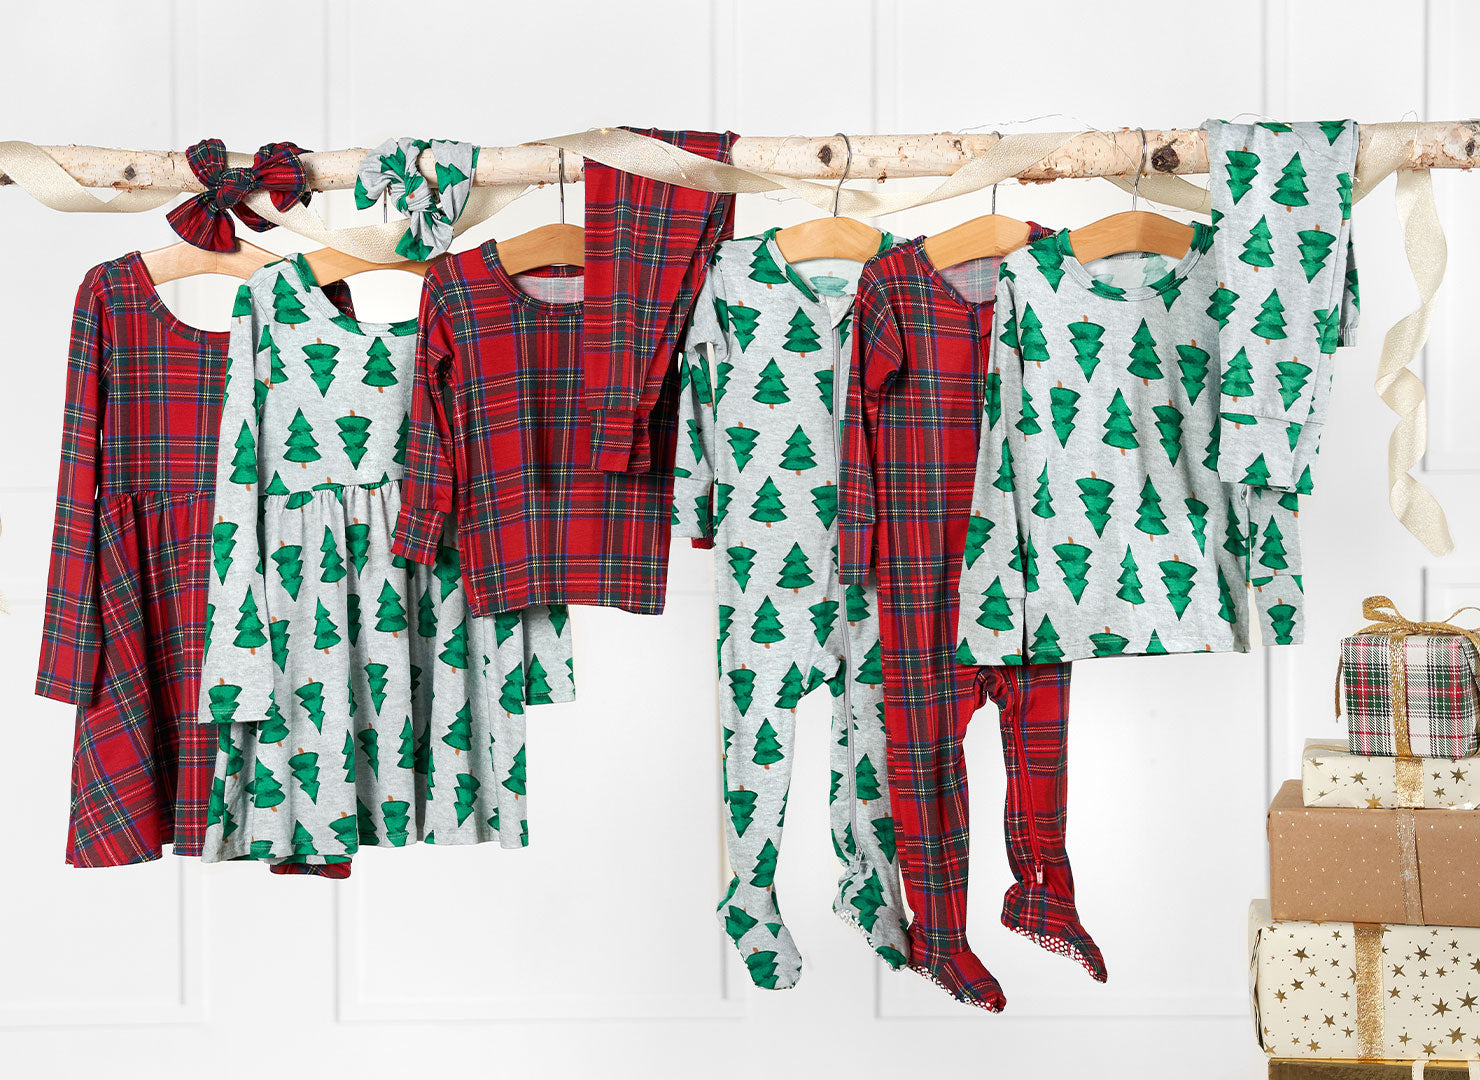 Colorful Christmas pajamas for toddlers and babies, arranged on a clothesline.